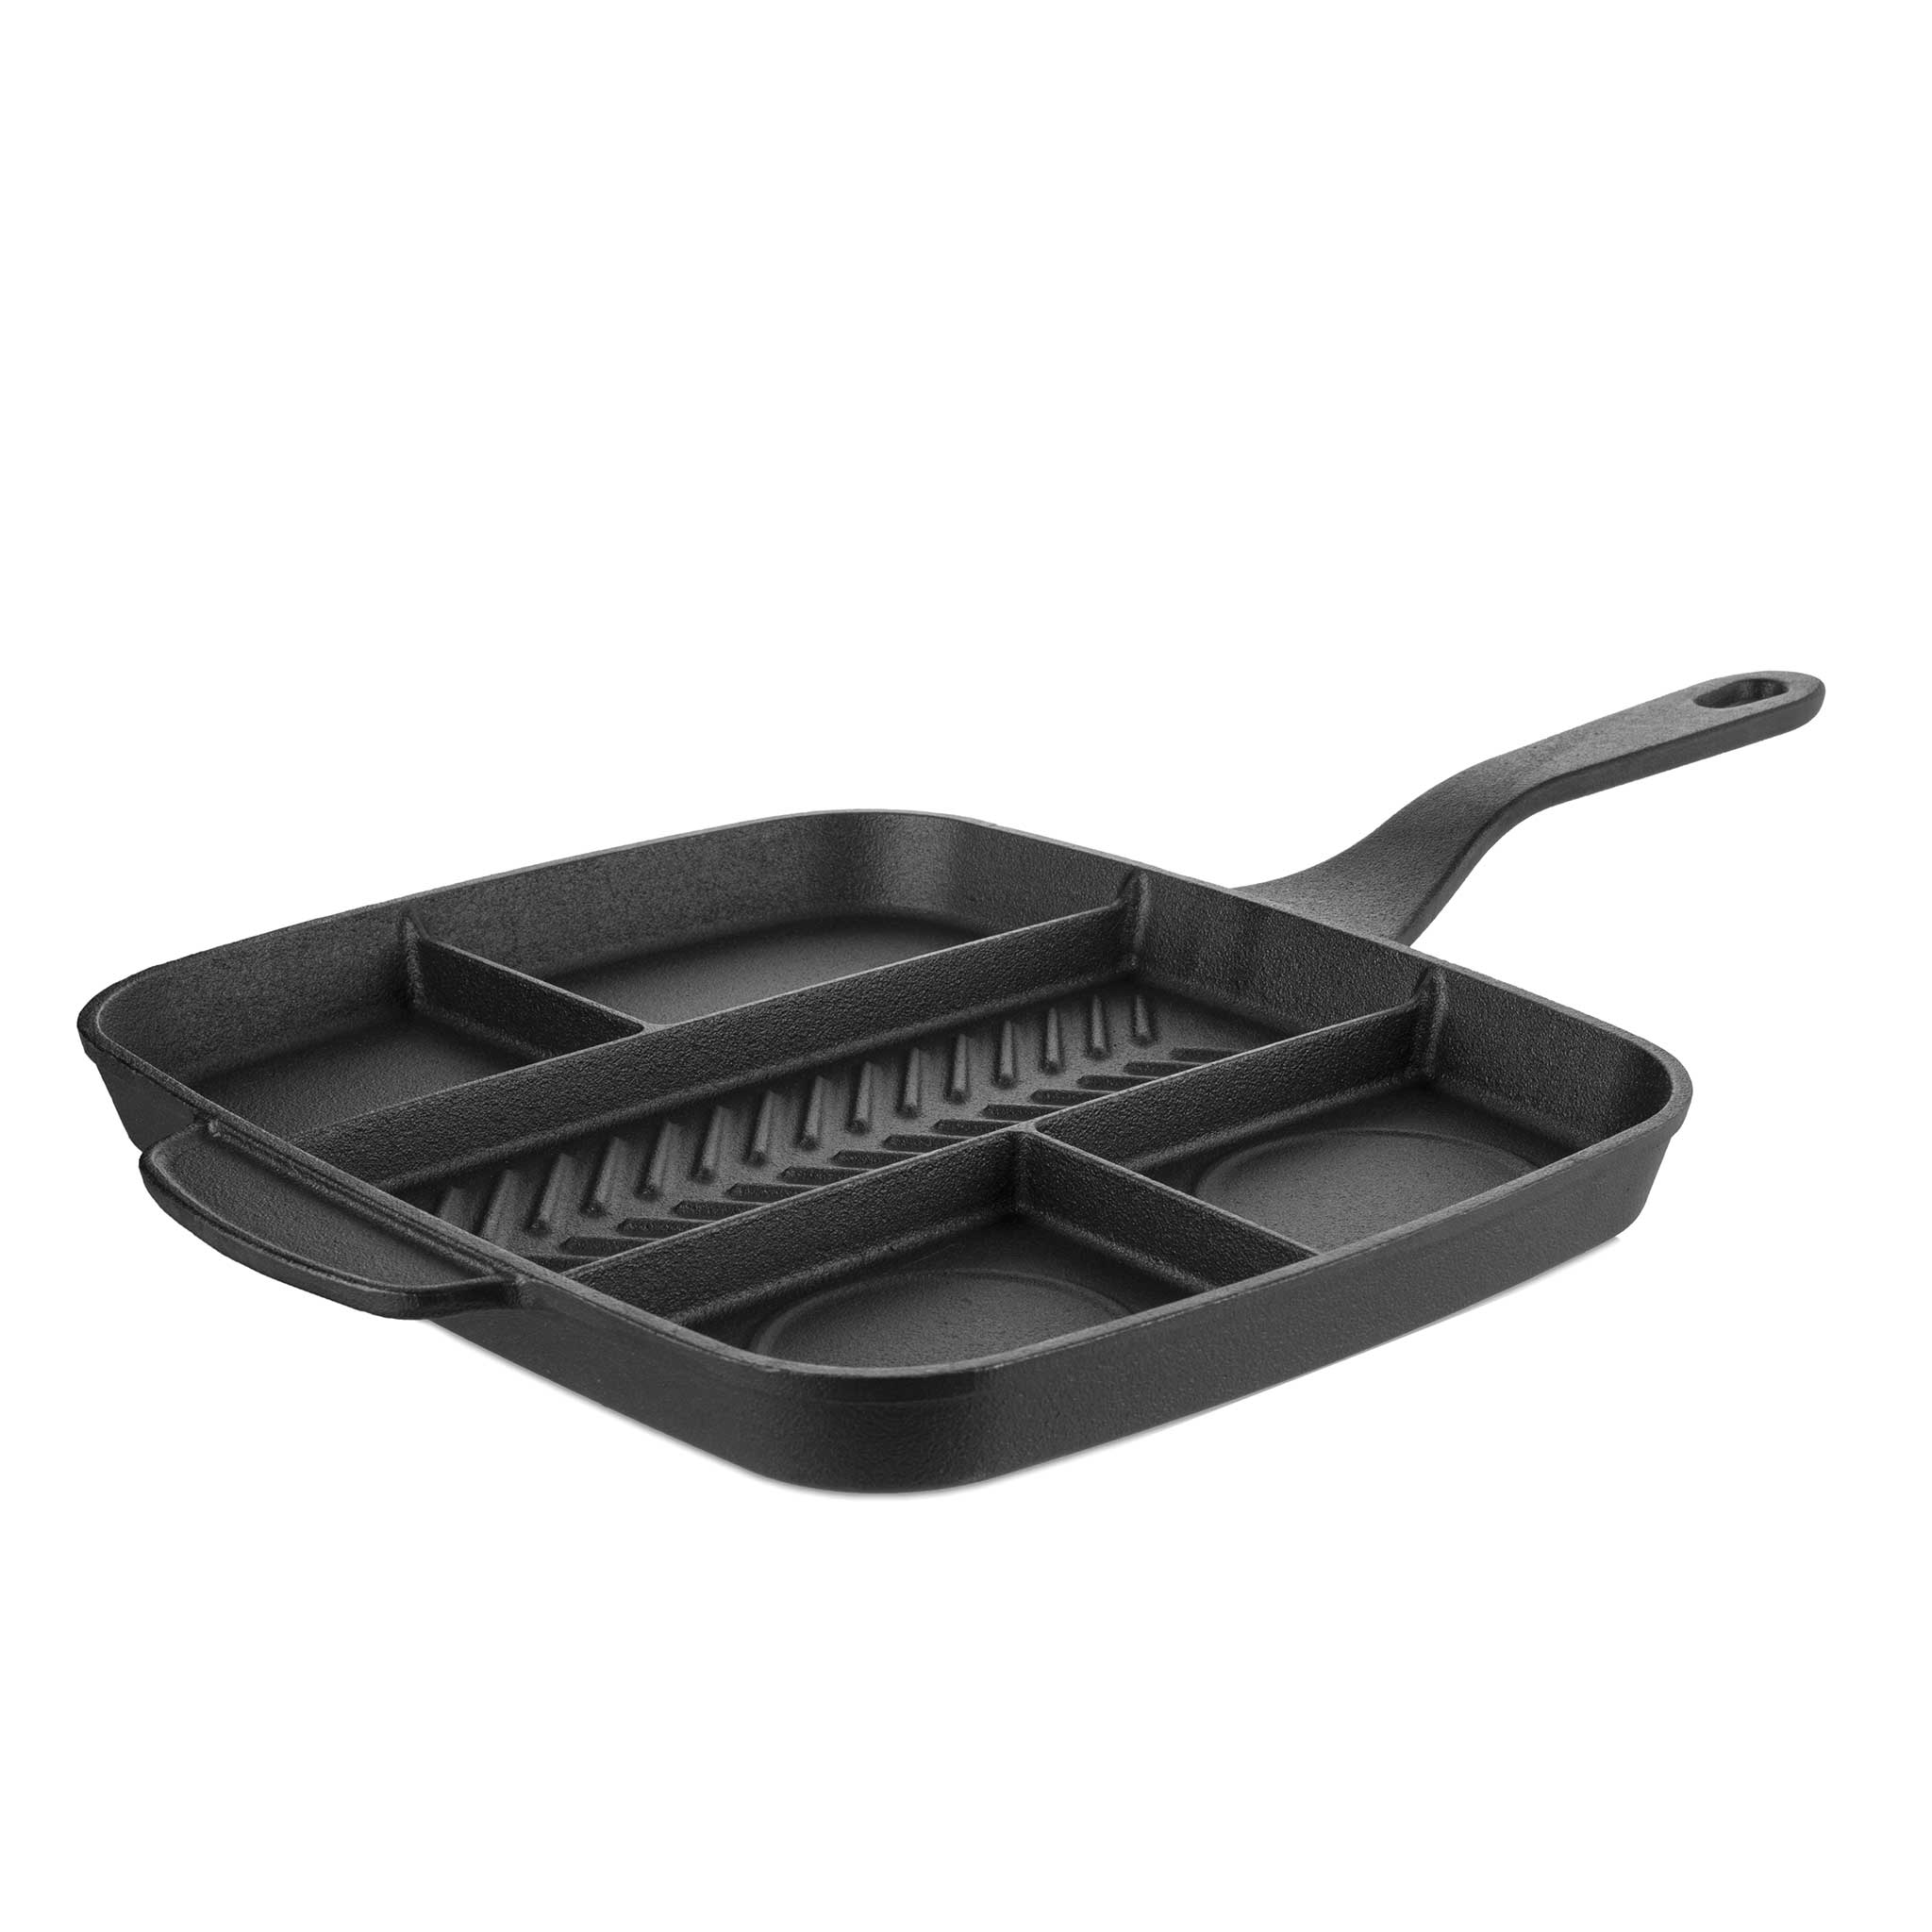 Ultimate Breakfast Pan from China Blue